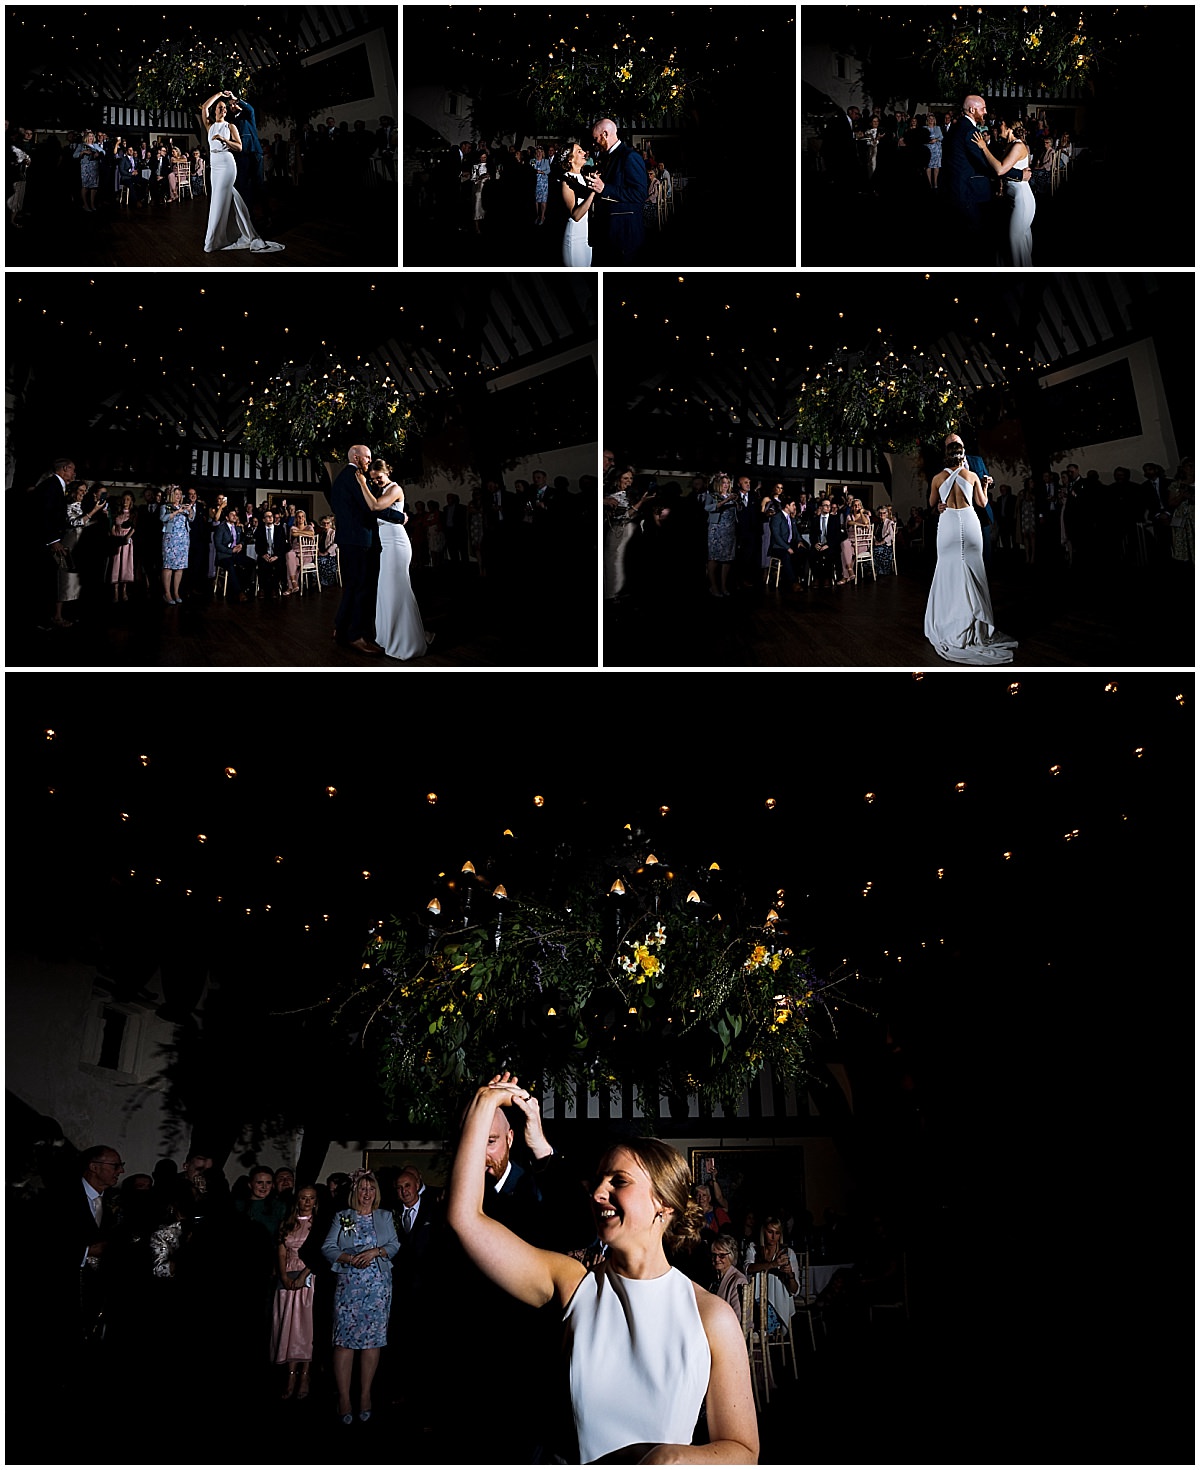 A collage of four photos capturing a bride and groom at their wedding reception. The couple is dancing under a canopy of flowers and string lights, with guests surrounding them. In sequence, the images show close-up and wide-angle views of their first dance, culminating in a shot focusing on the bride as she twirls, smiling brightly.